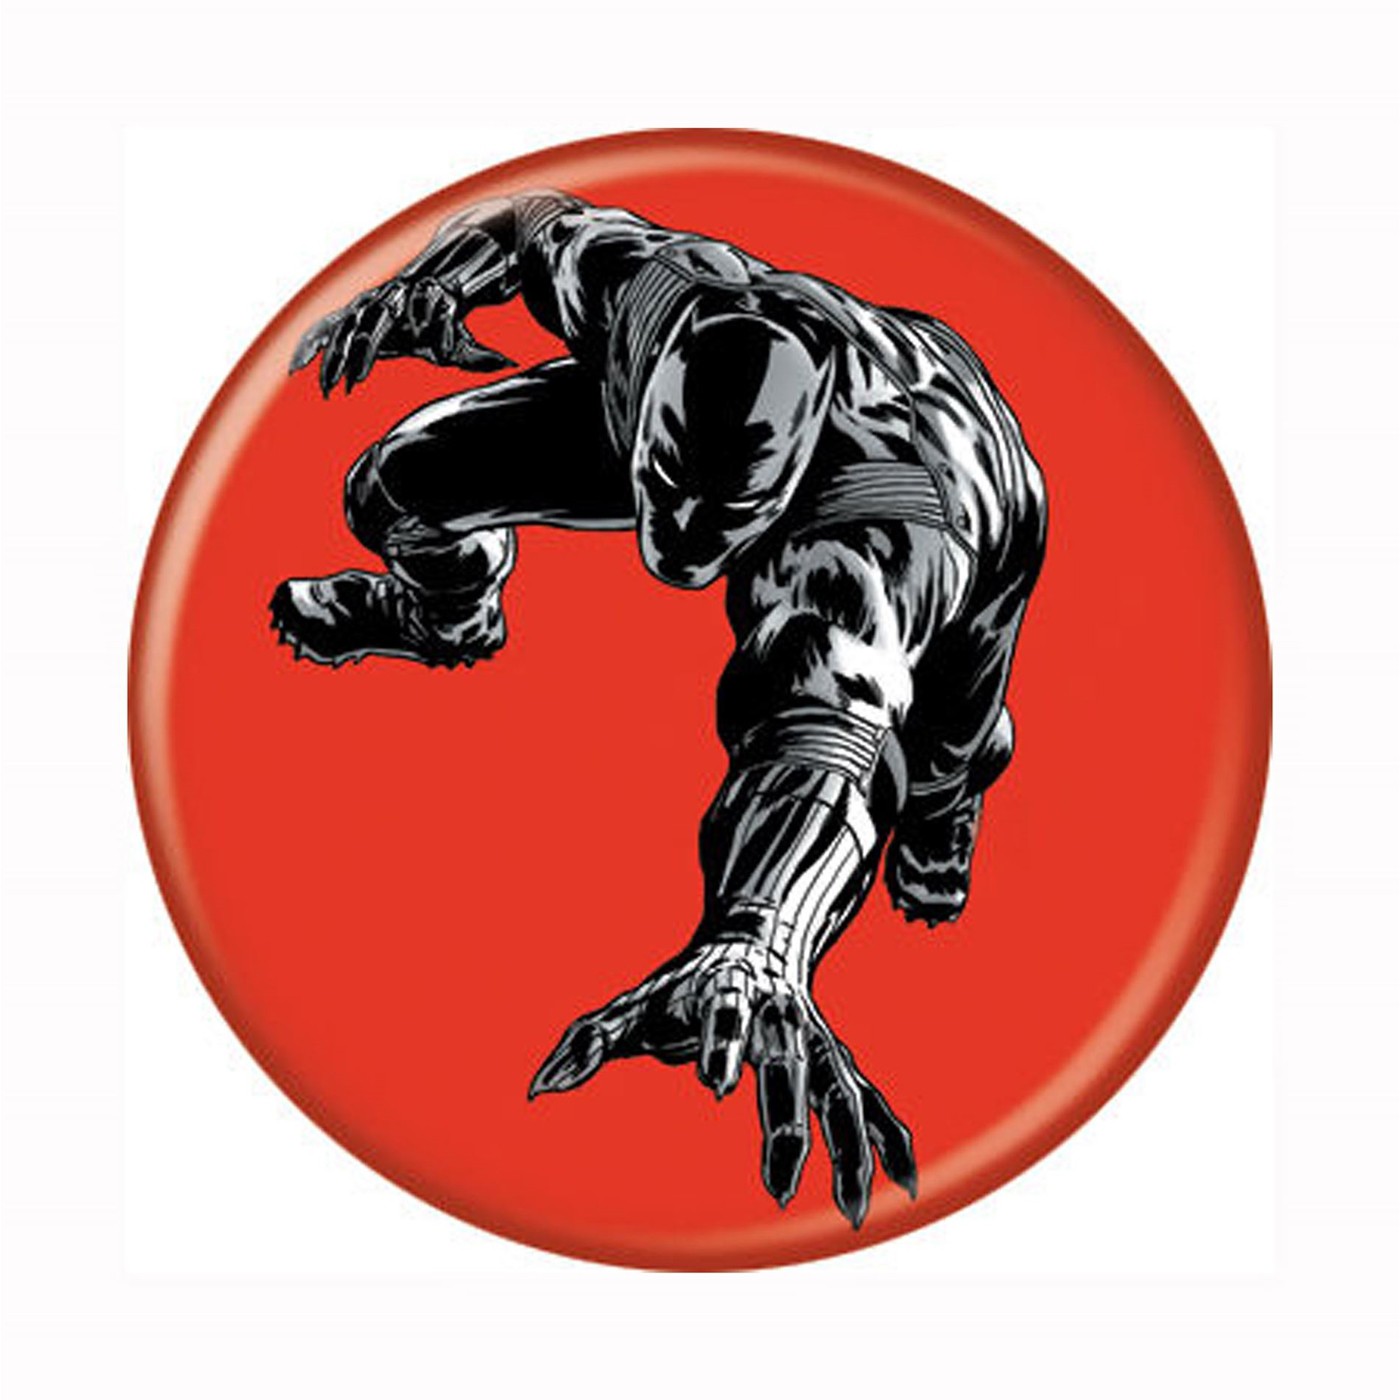 Black Panther Red Button